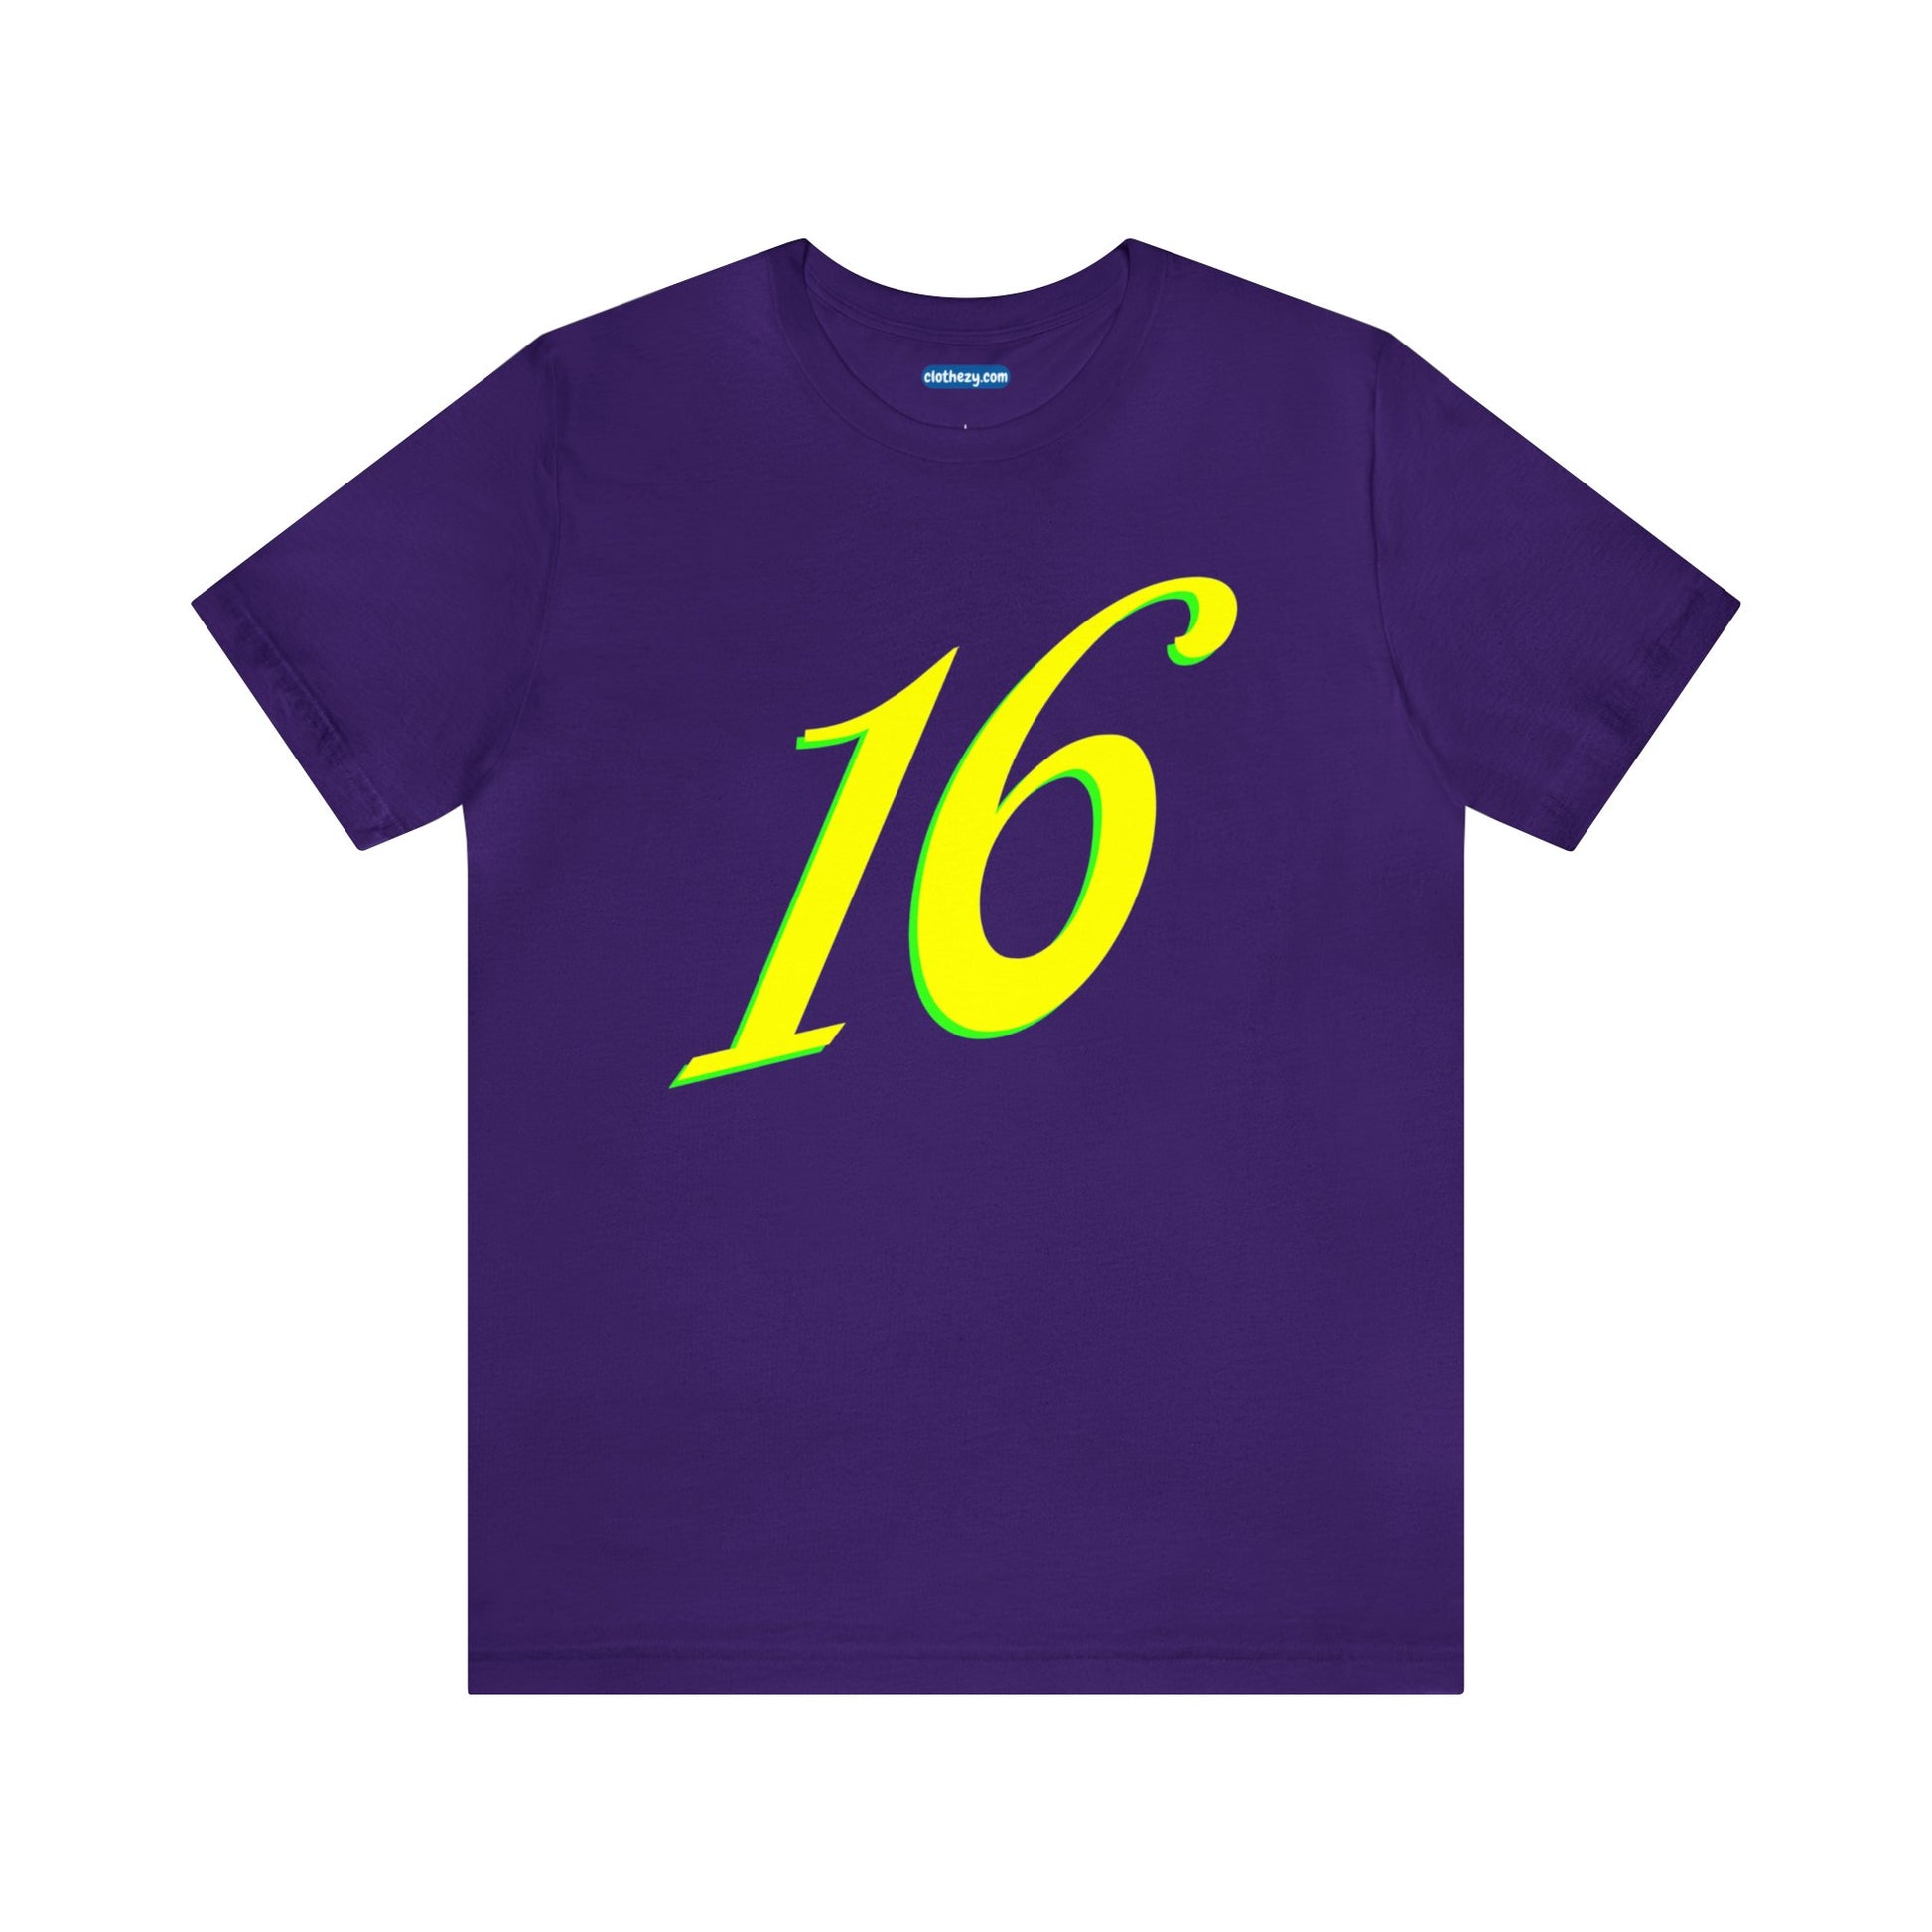 Number 16 Design - Soft Cotton Tee for birthdays and celebrations, Gift for friends and family, Multiple Options by clothezy.com in Purple Size Small - Buy Now